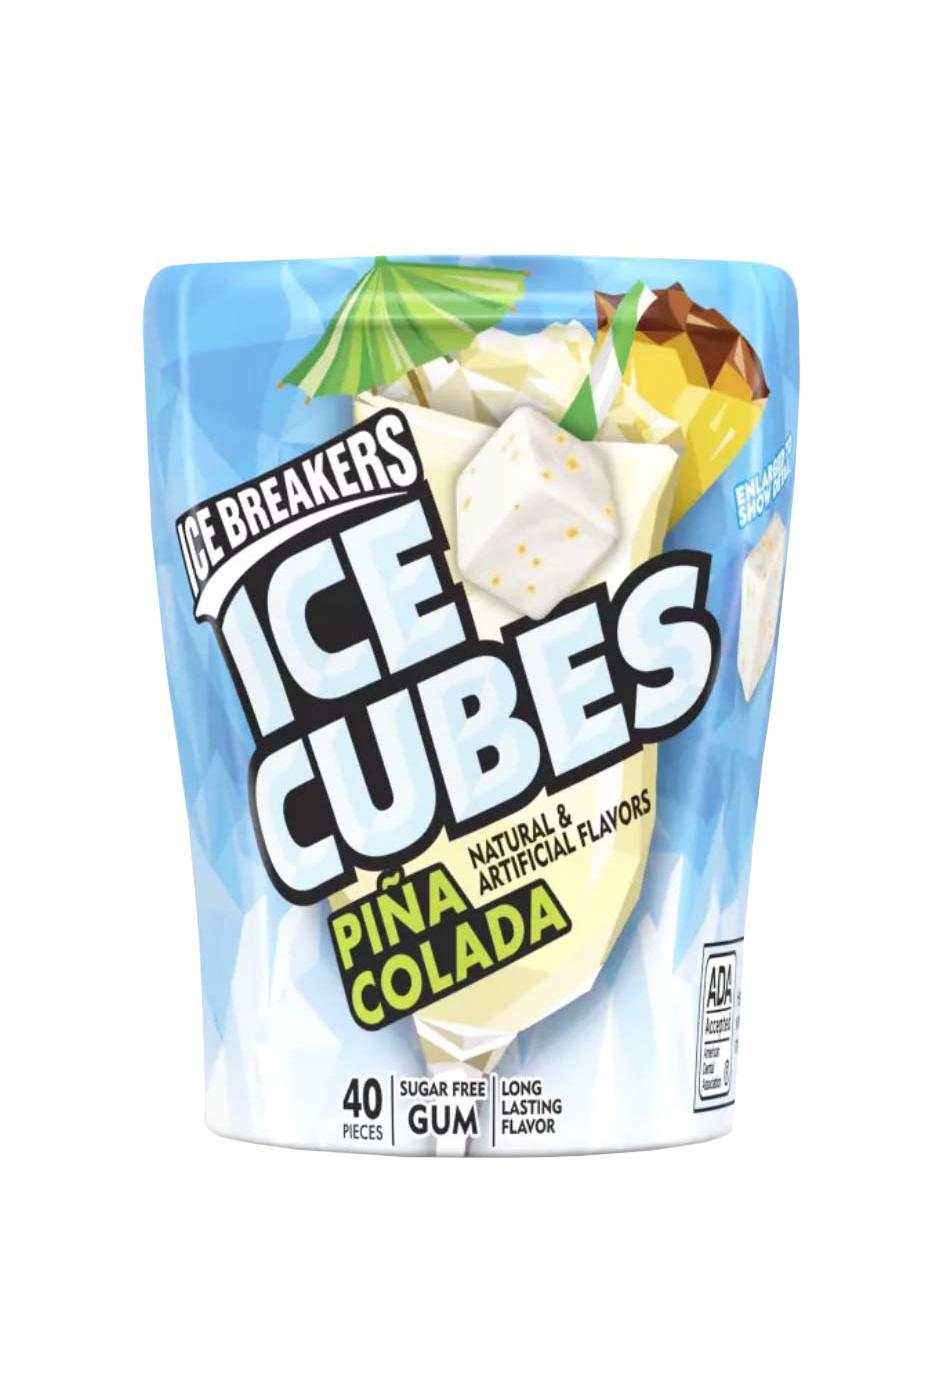 Ice Breakers Ice Cubes Sugar Free Chewing Gum - Pina Colada; image 1 of 2